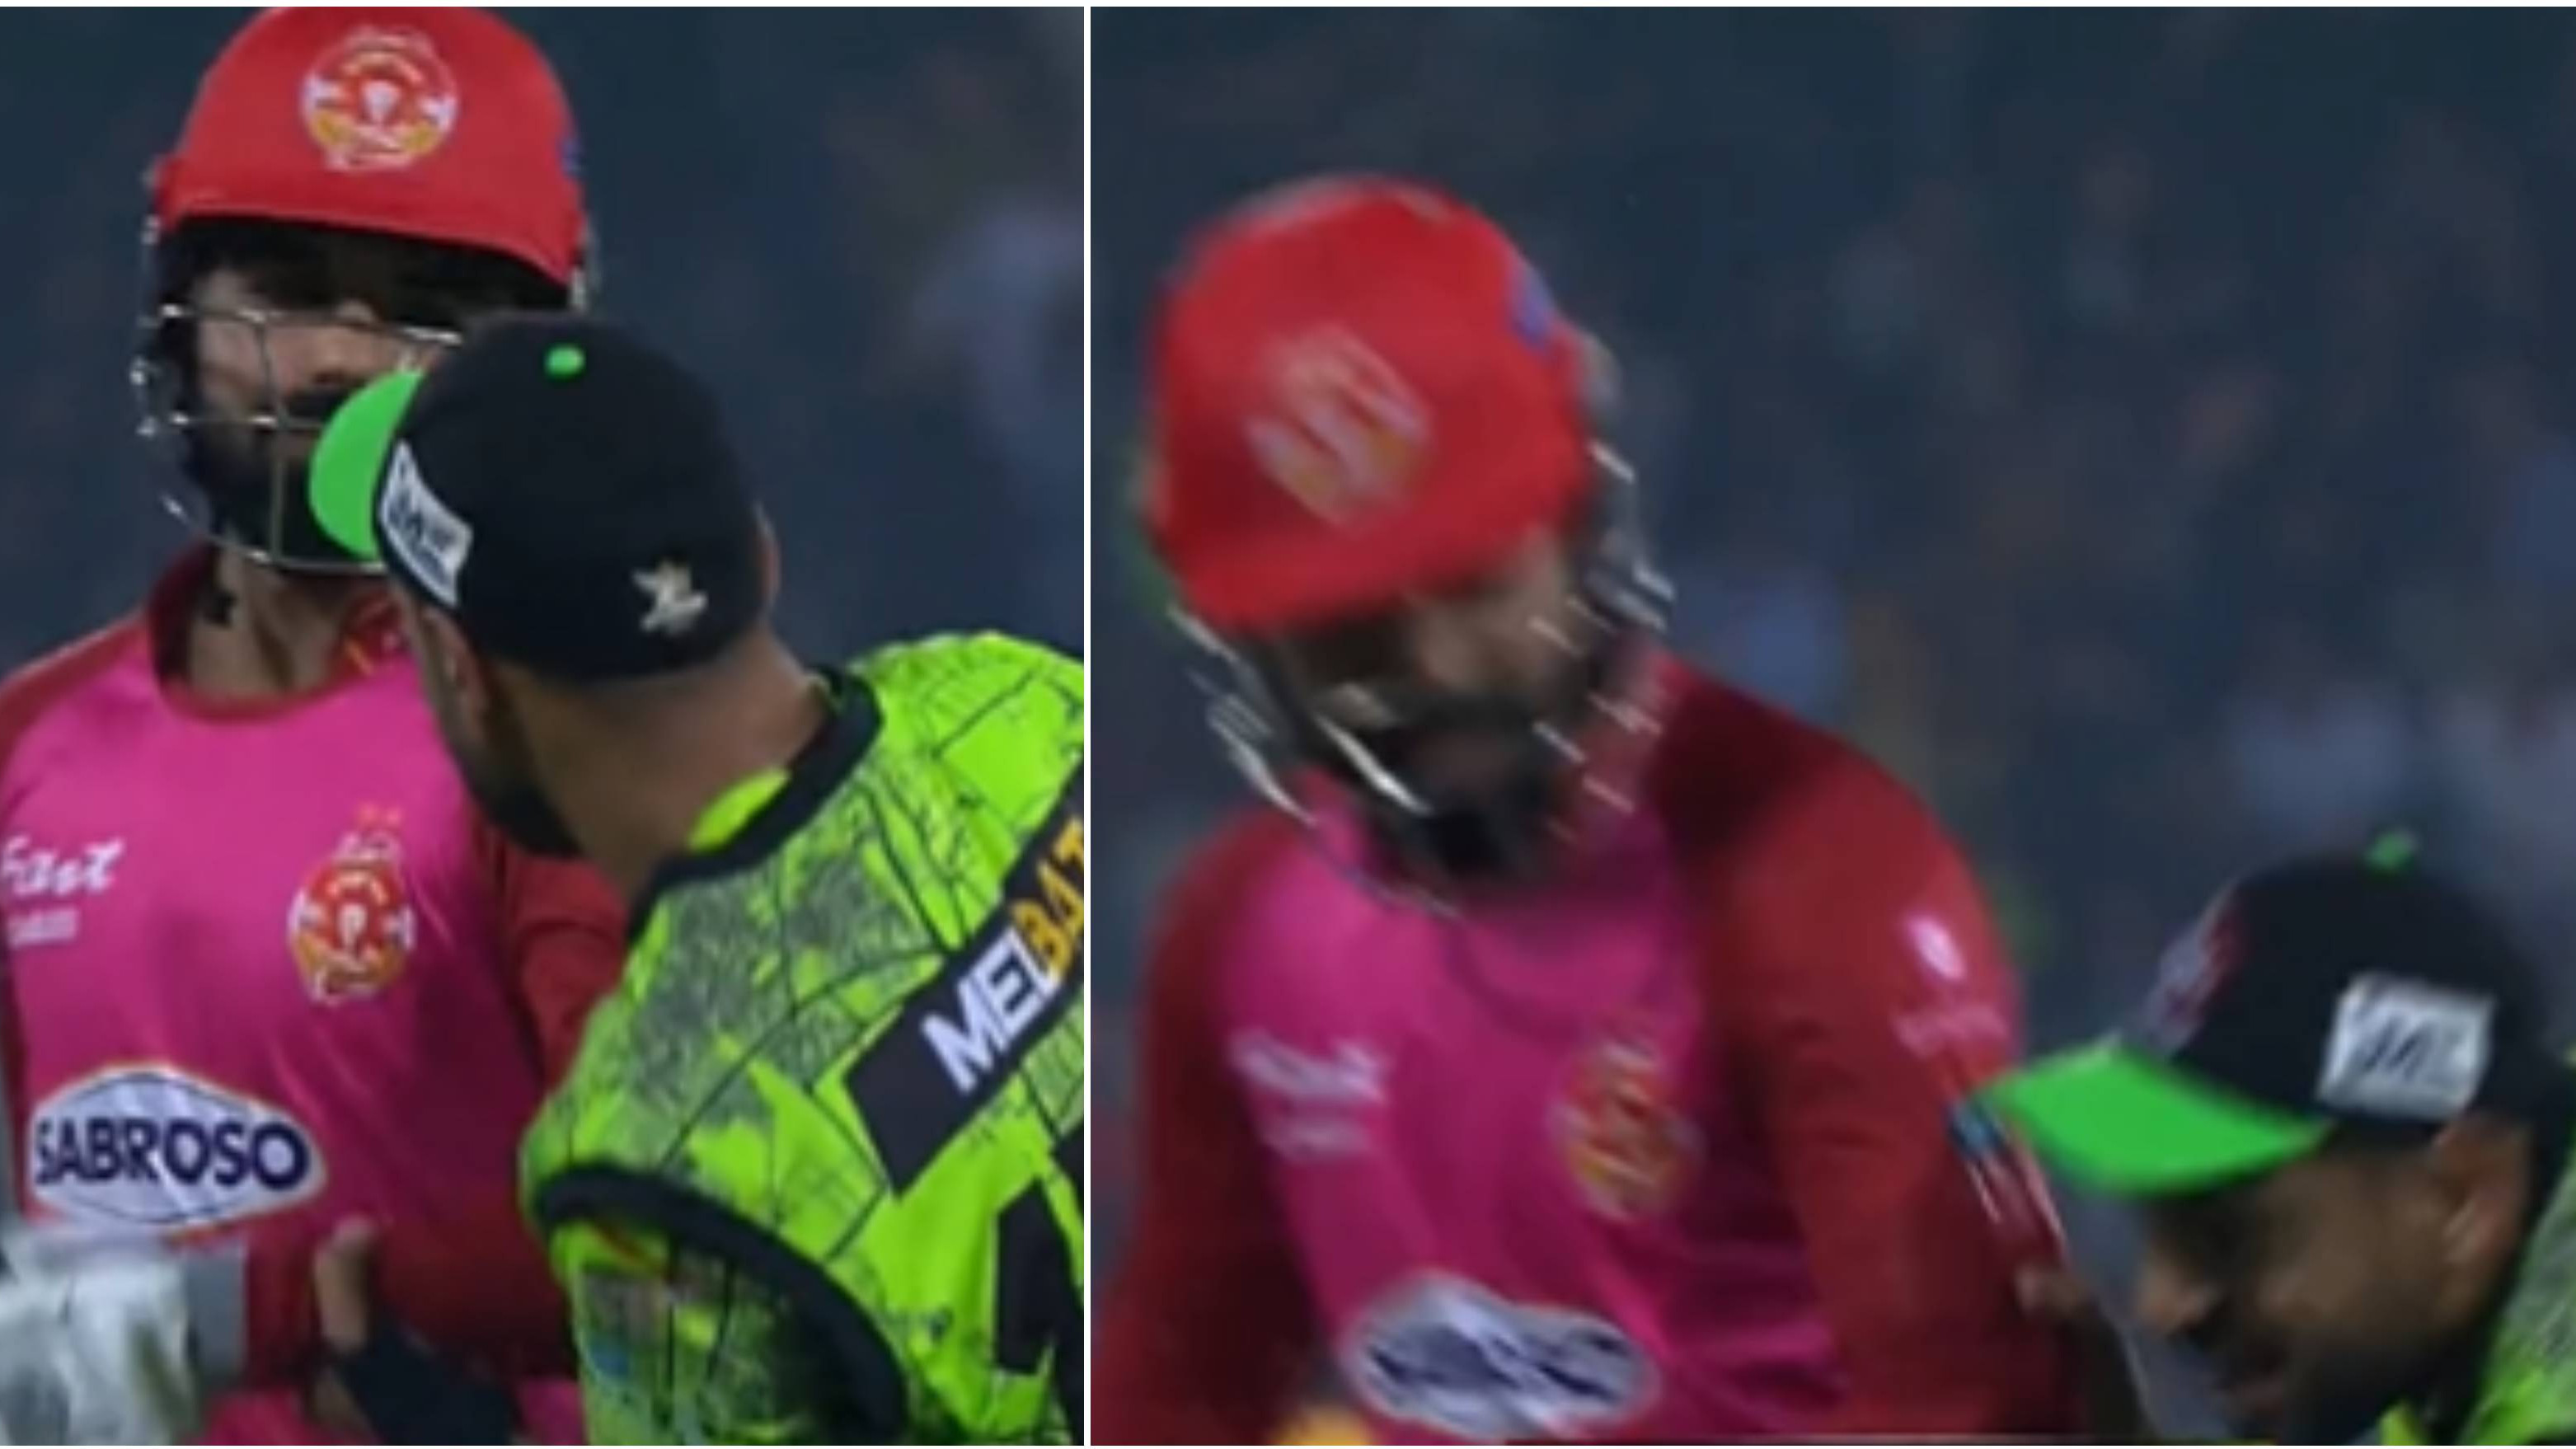 WATCH: Shadab Khan nudges aside Haris Rauf in frustration after latter teases him in a PSL match